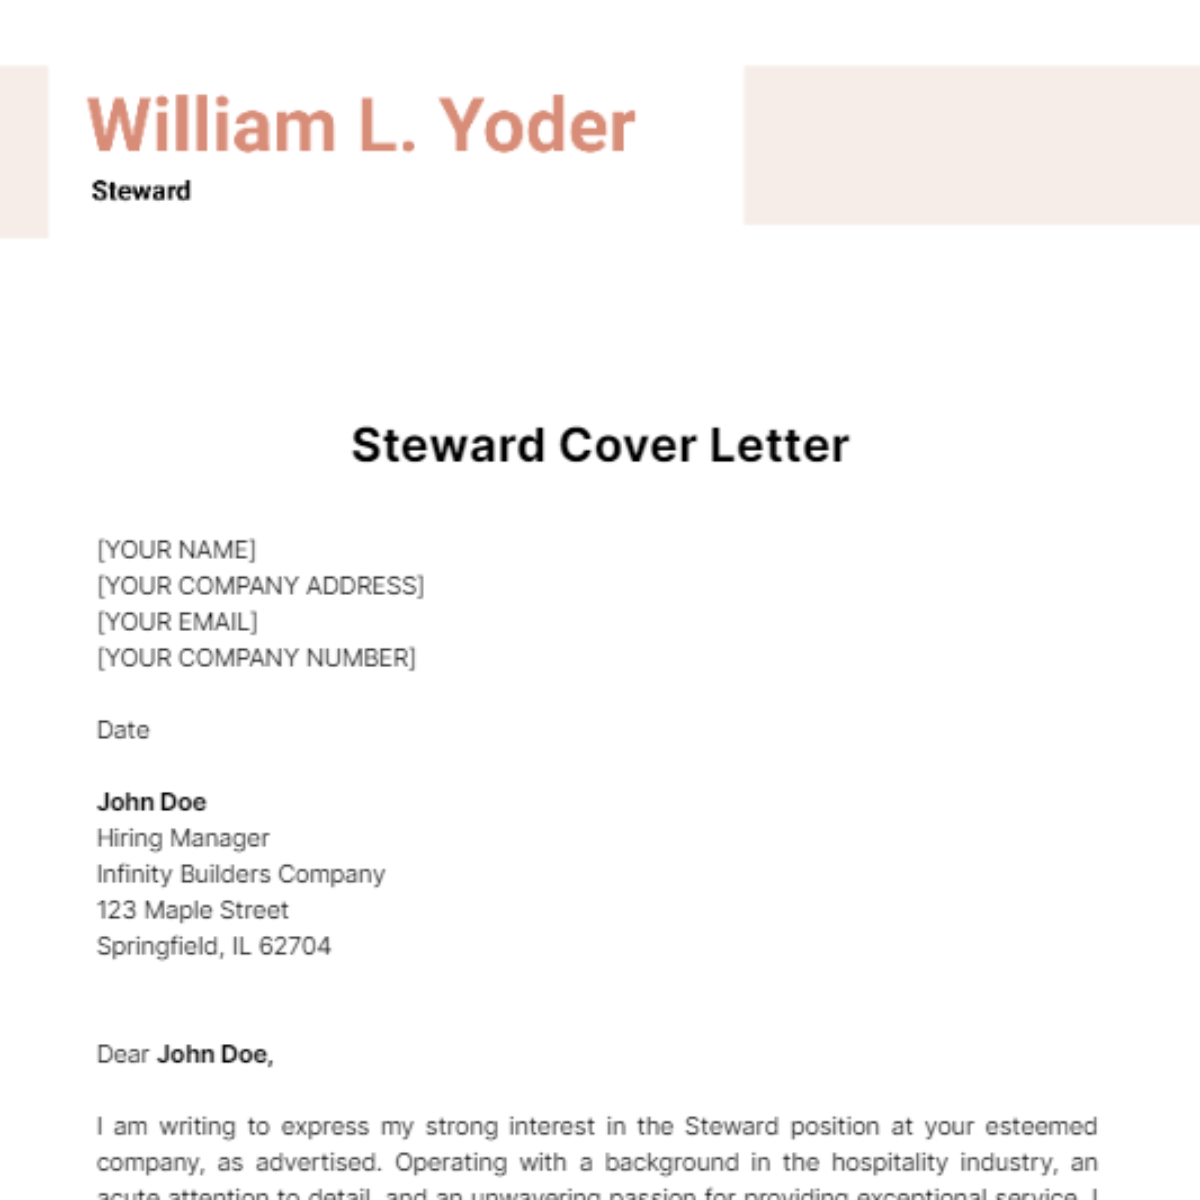 Steward Cover Letter Template